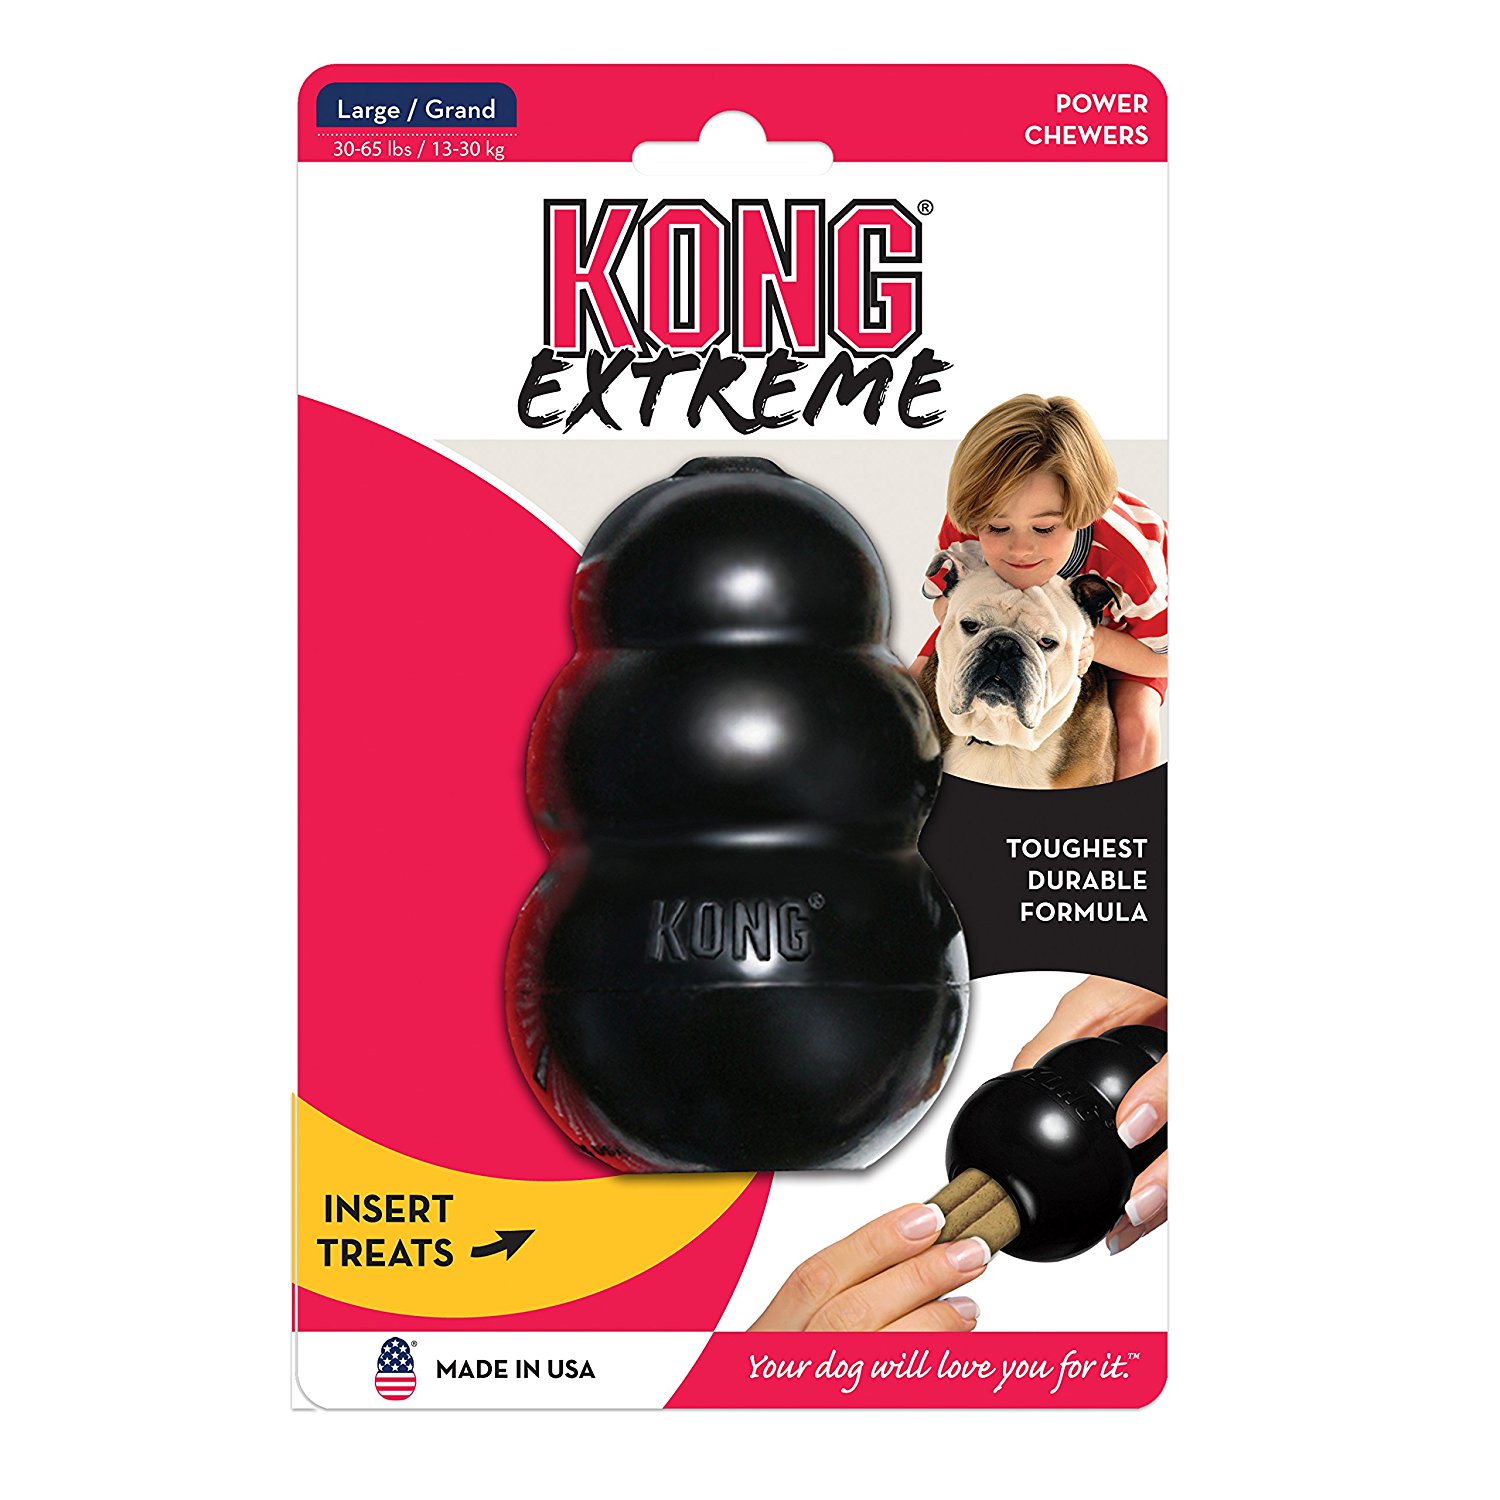 Kong dog toy is great to entertain service dogs.